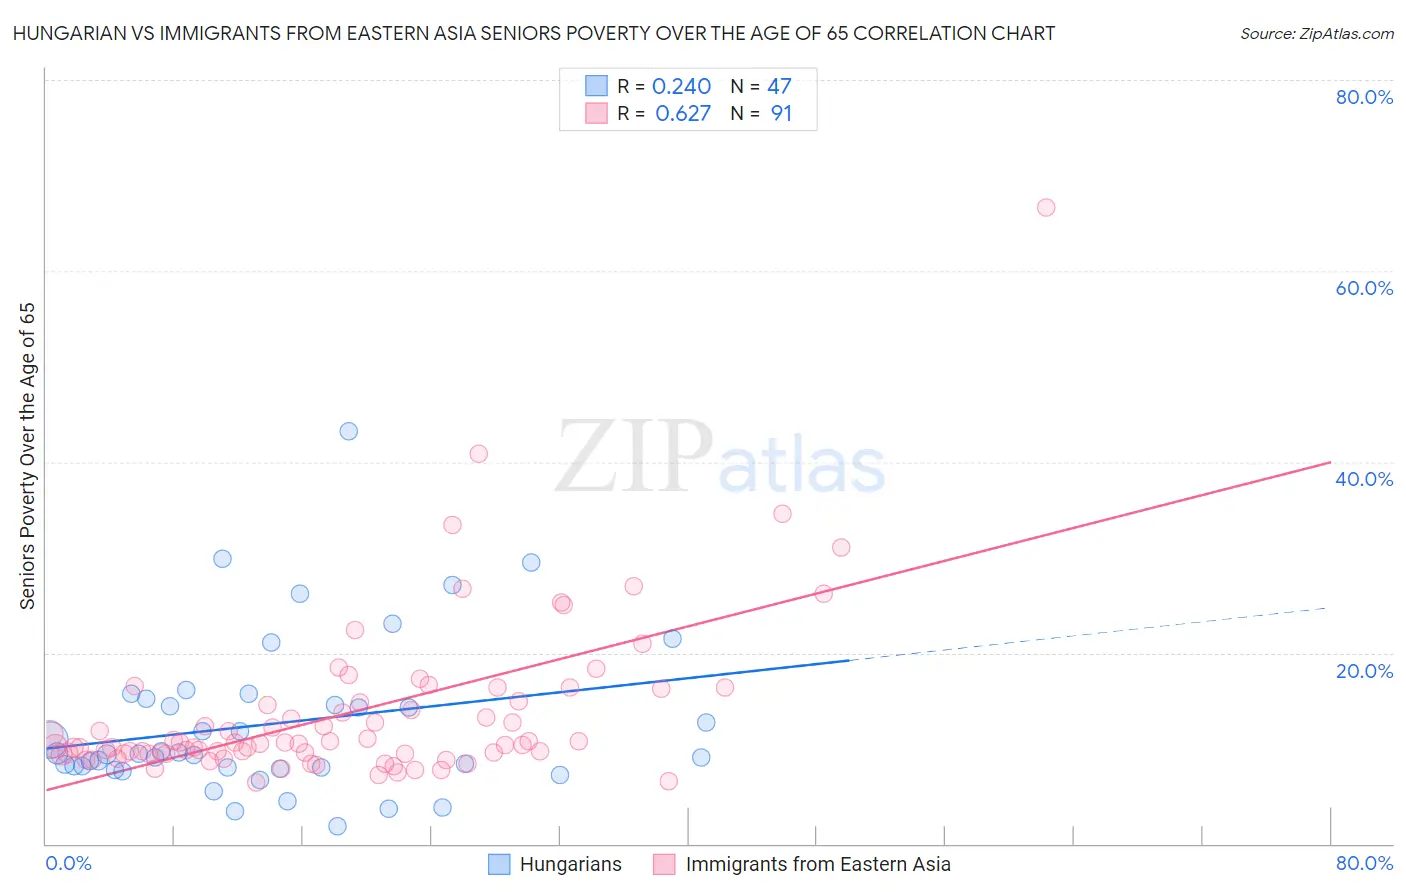 Hungarian vs Immigrants from Eastern Asia Seniors Poverty Over the Age of 65